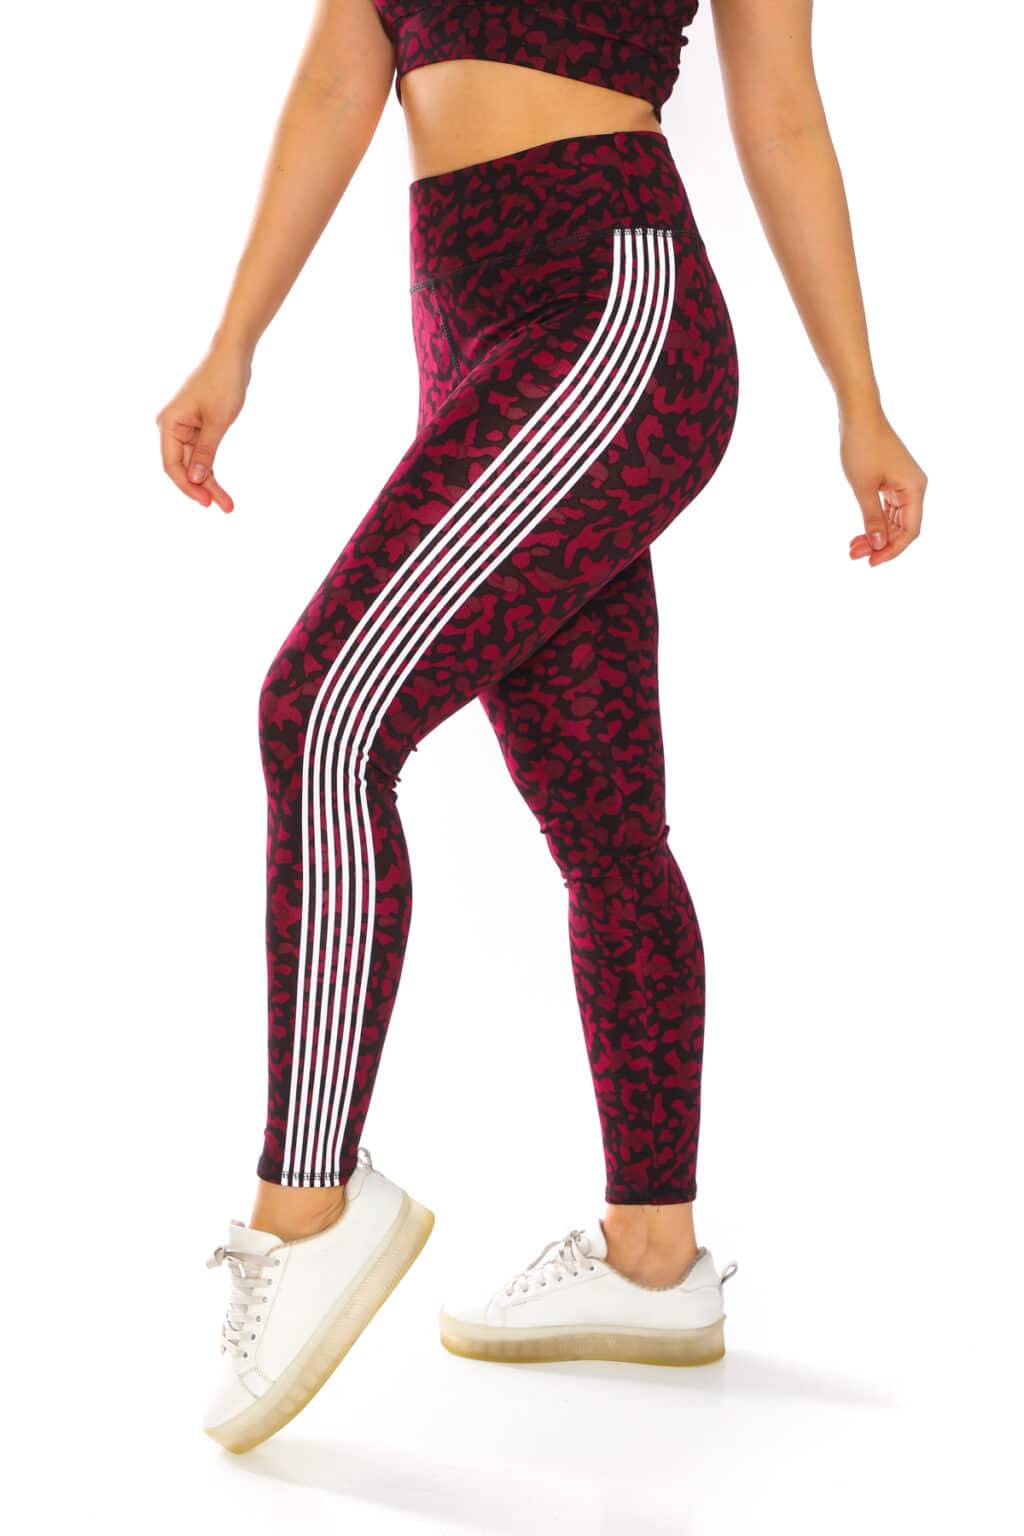 Activewear High Waisted Leopard Print Yoga Pants with White Color Side  Stripes - Its All Leggings